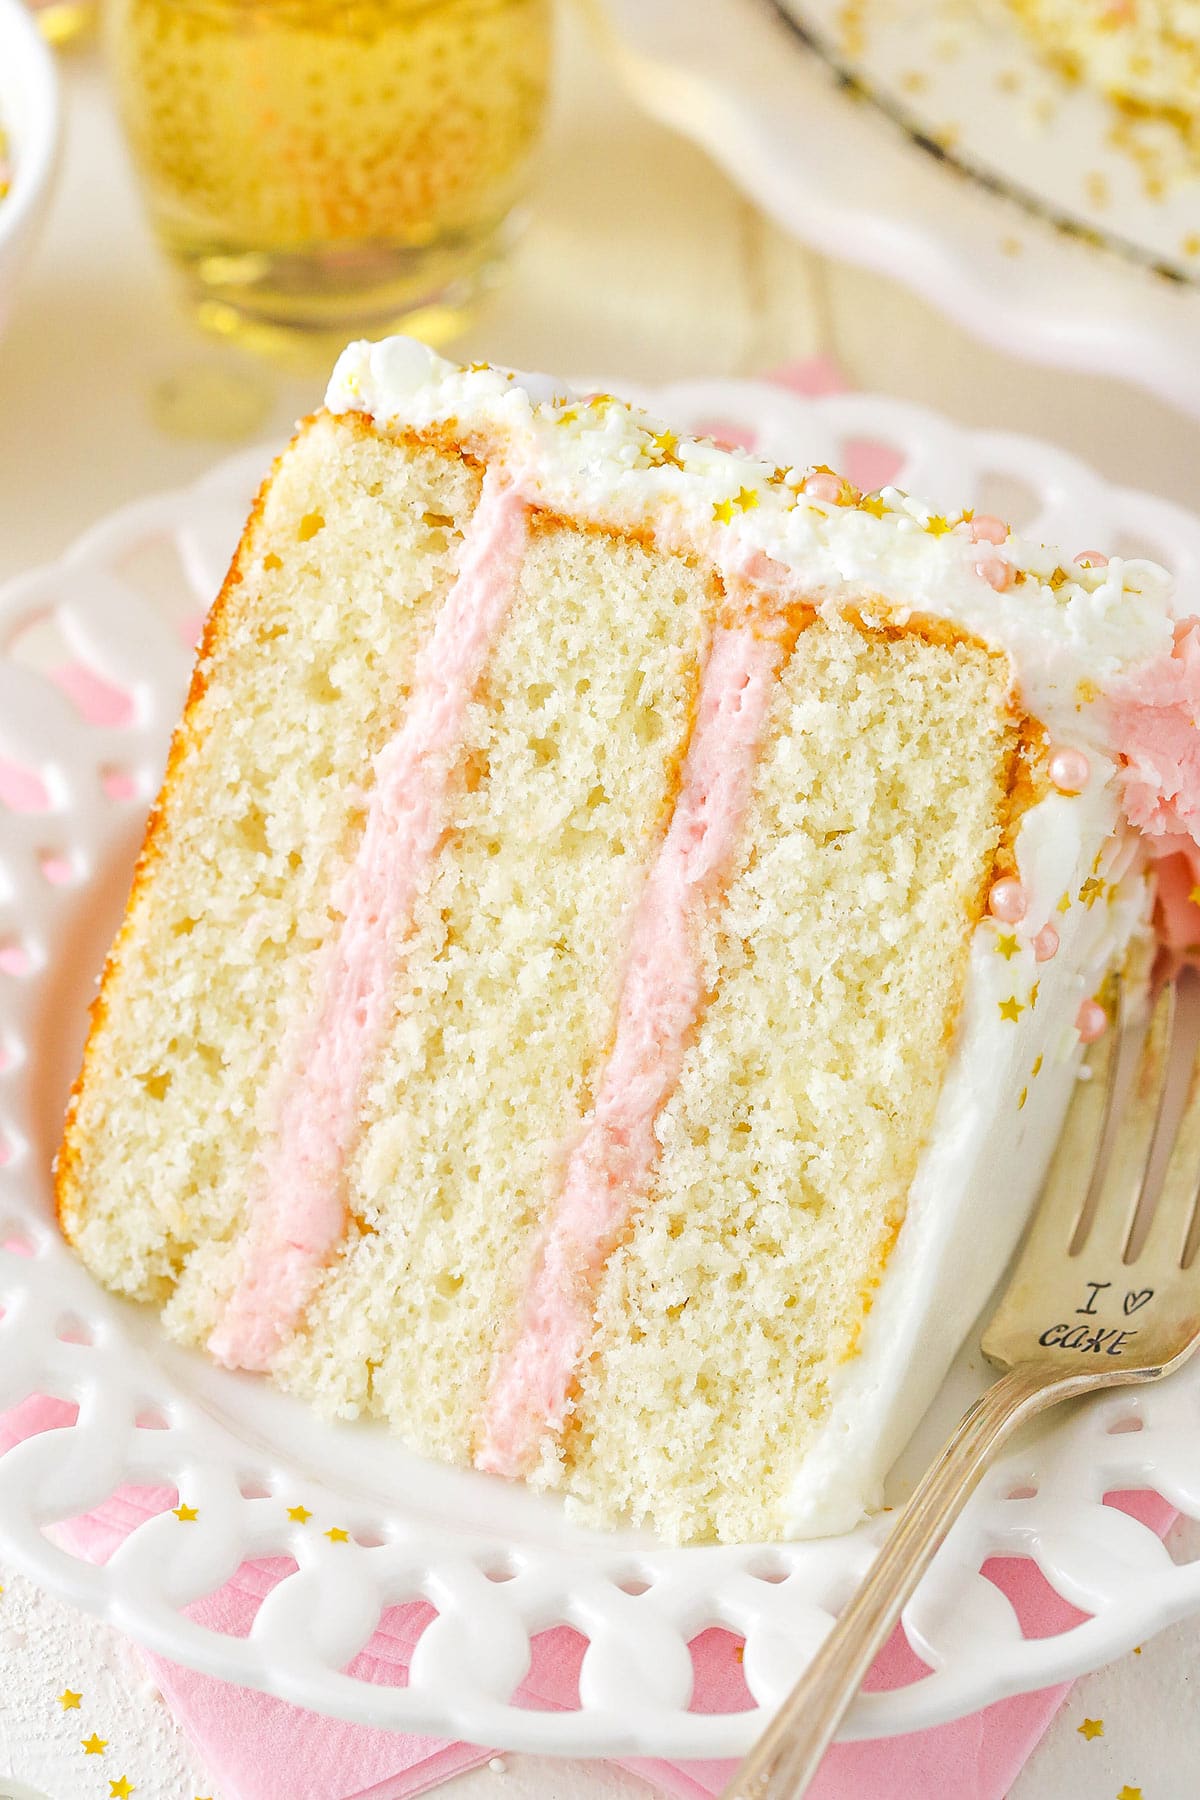 A close-up shot of a piece of strawberry champagne cake on a plate with a fork